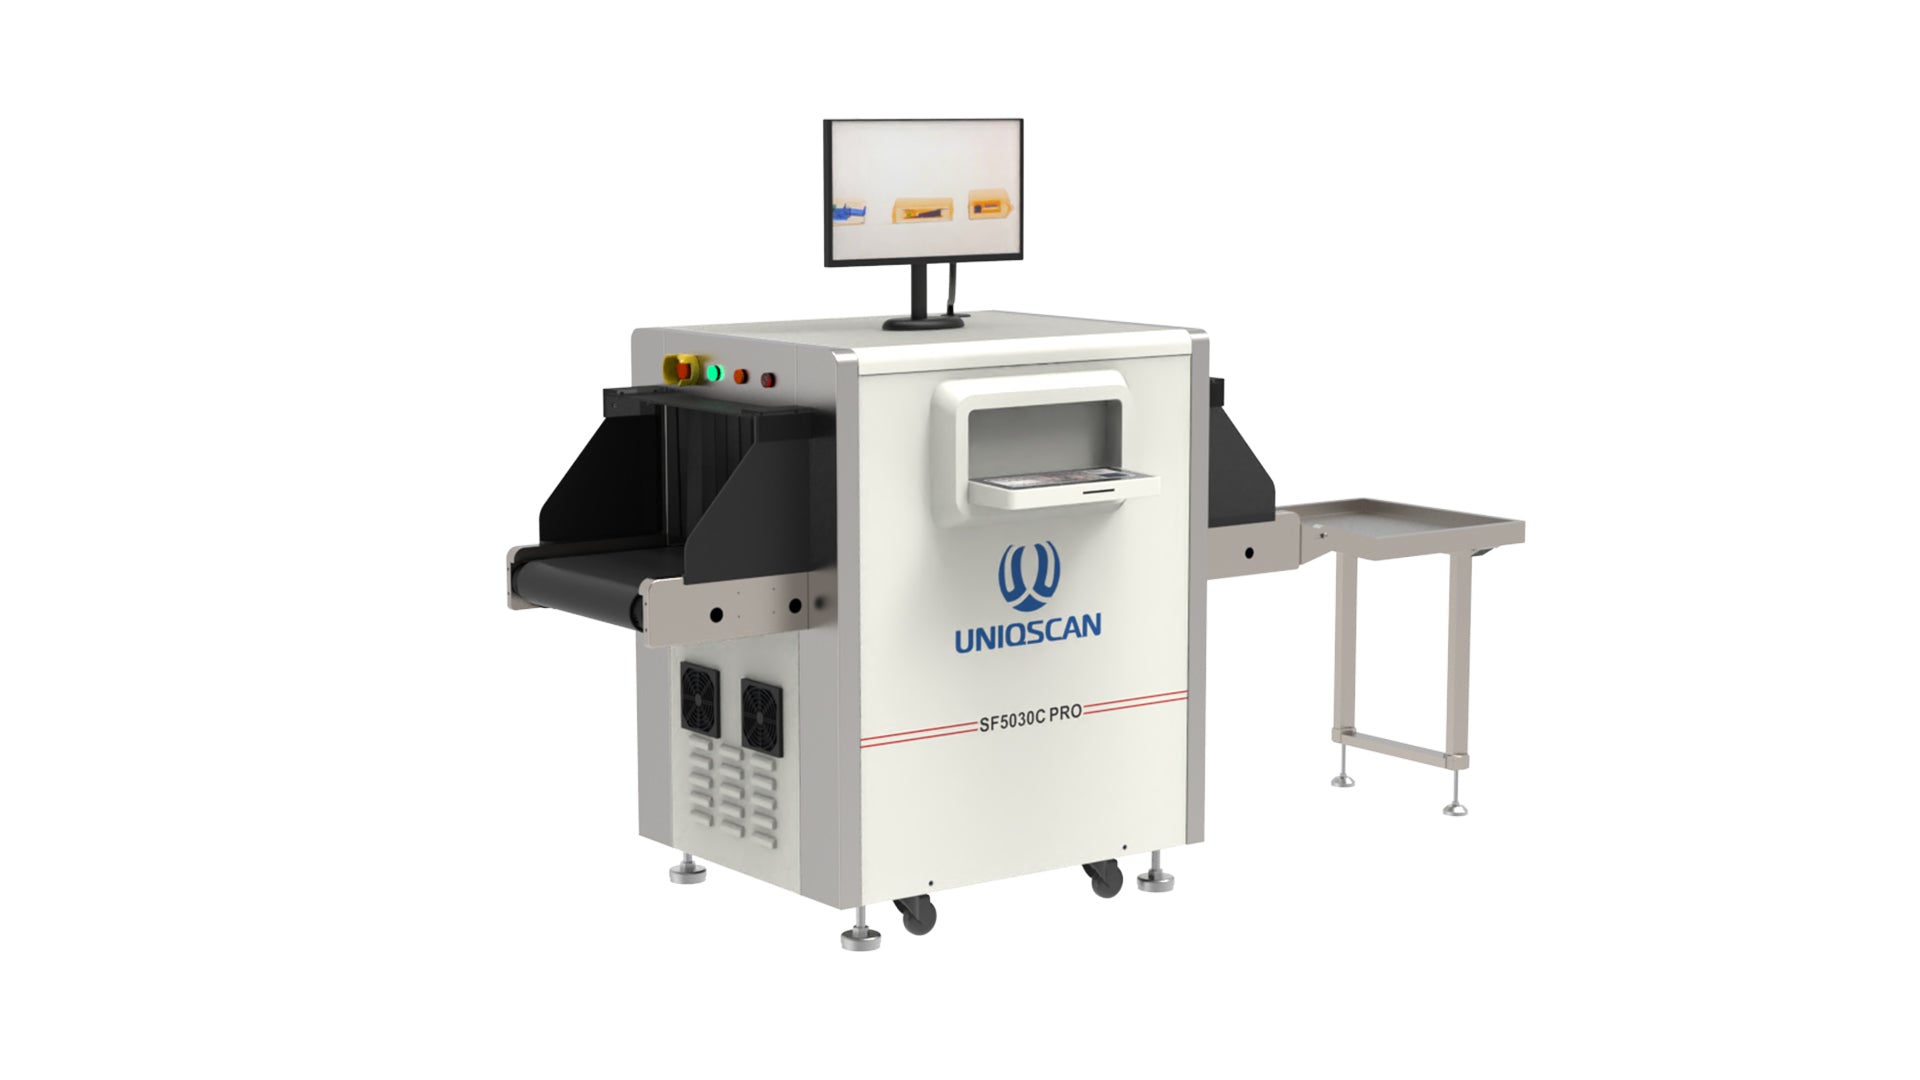 X-Ray Baggage Scanner